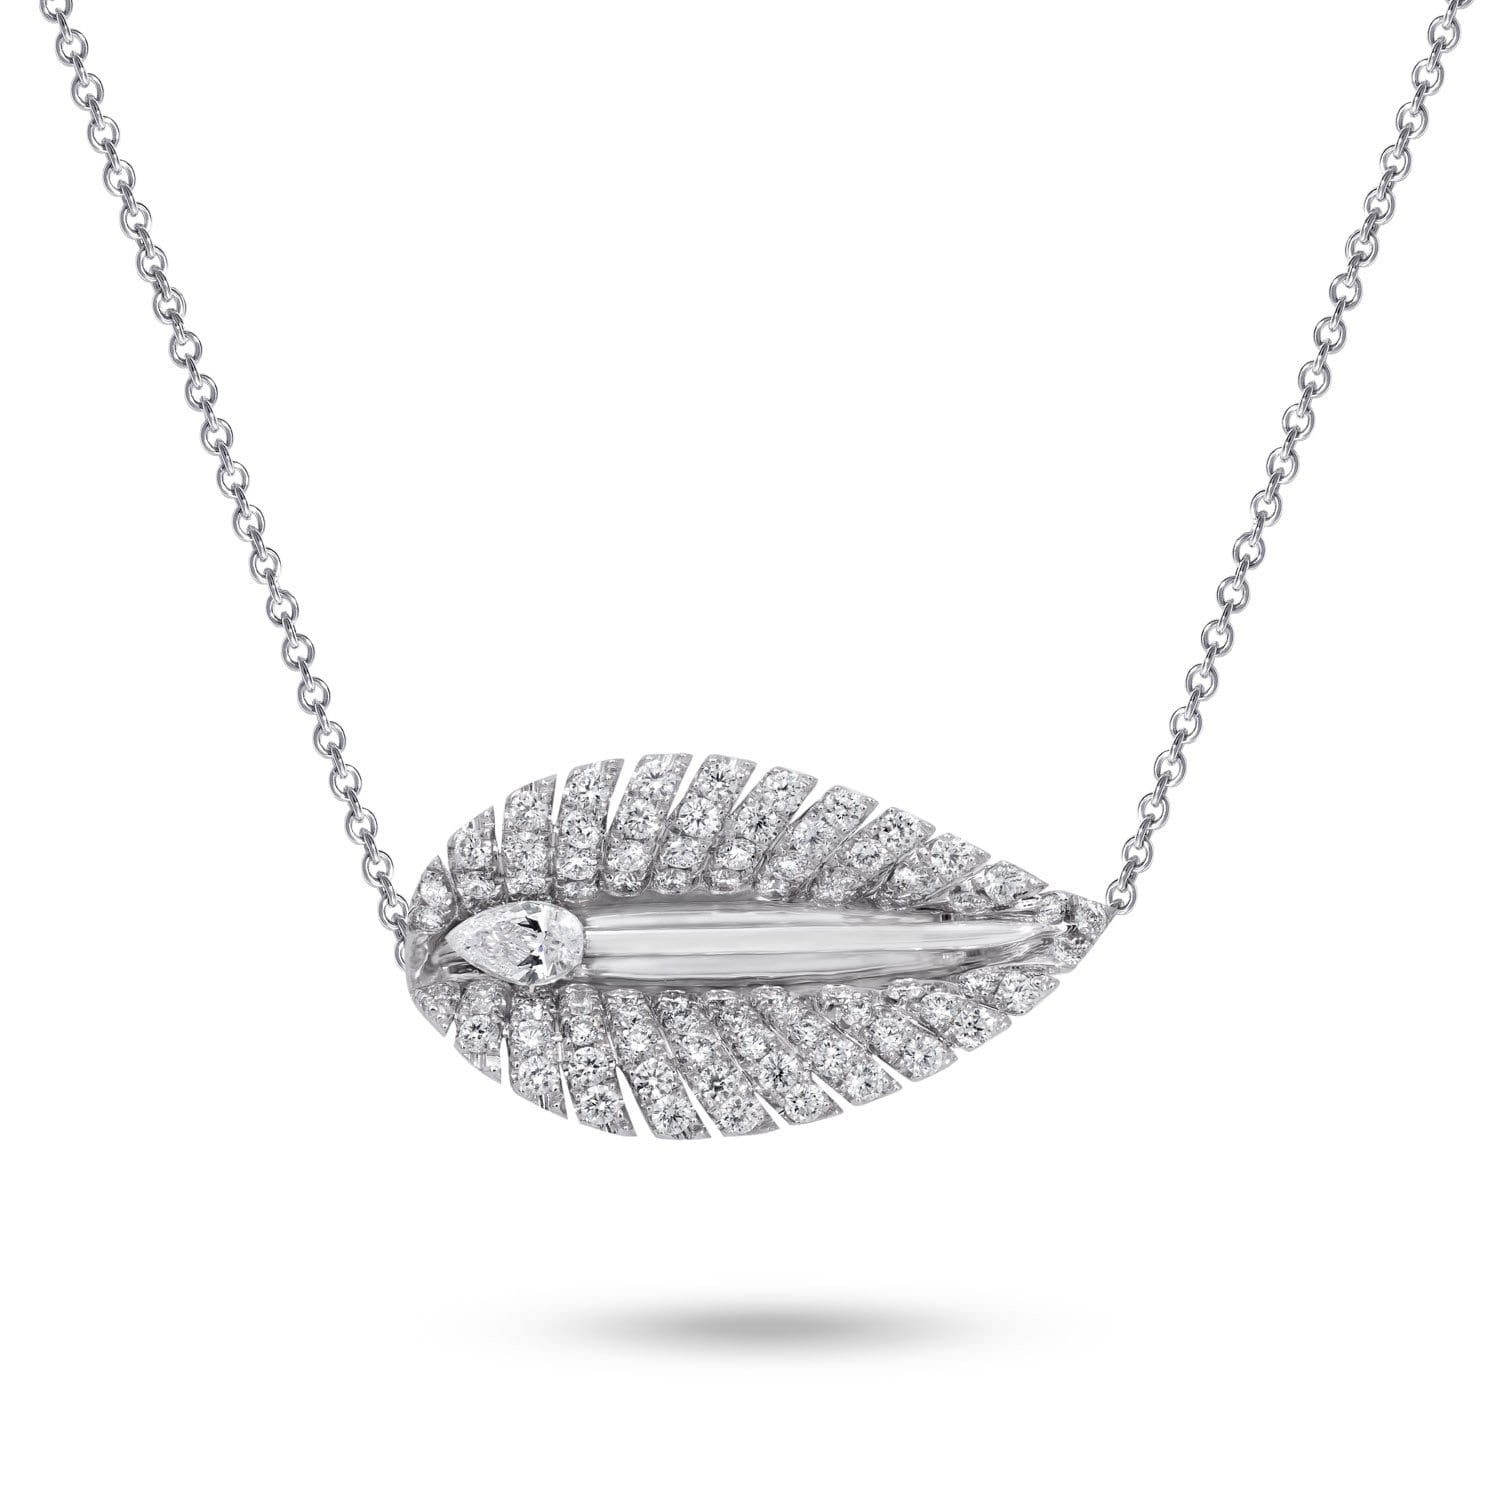 YOU MOVE ME The Dewdrop All Diamond Necklace